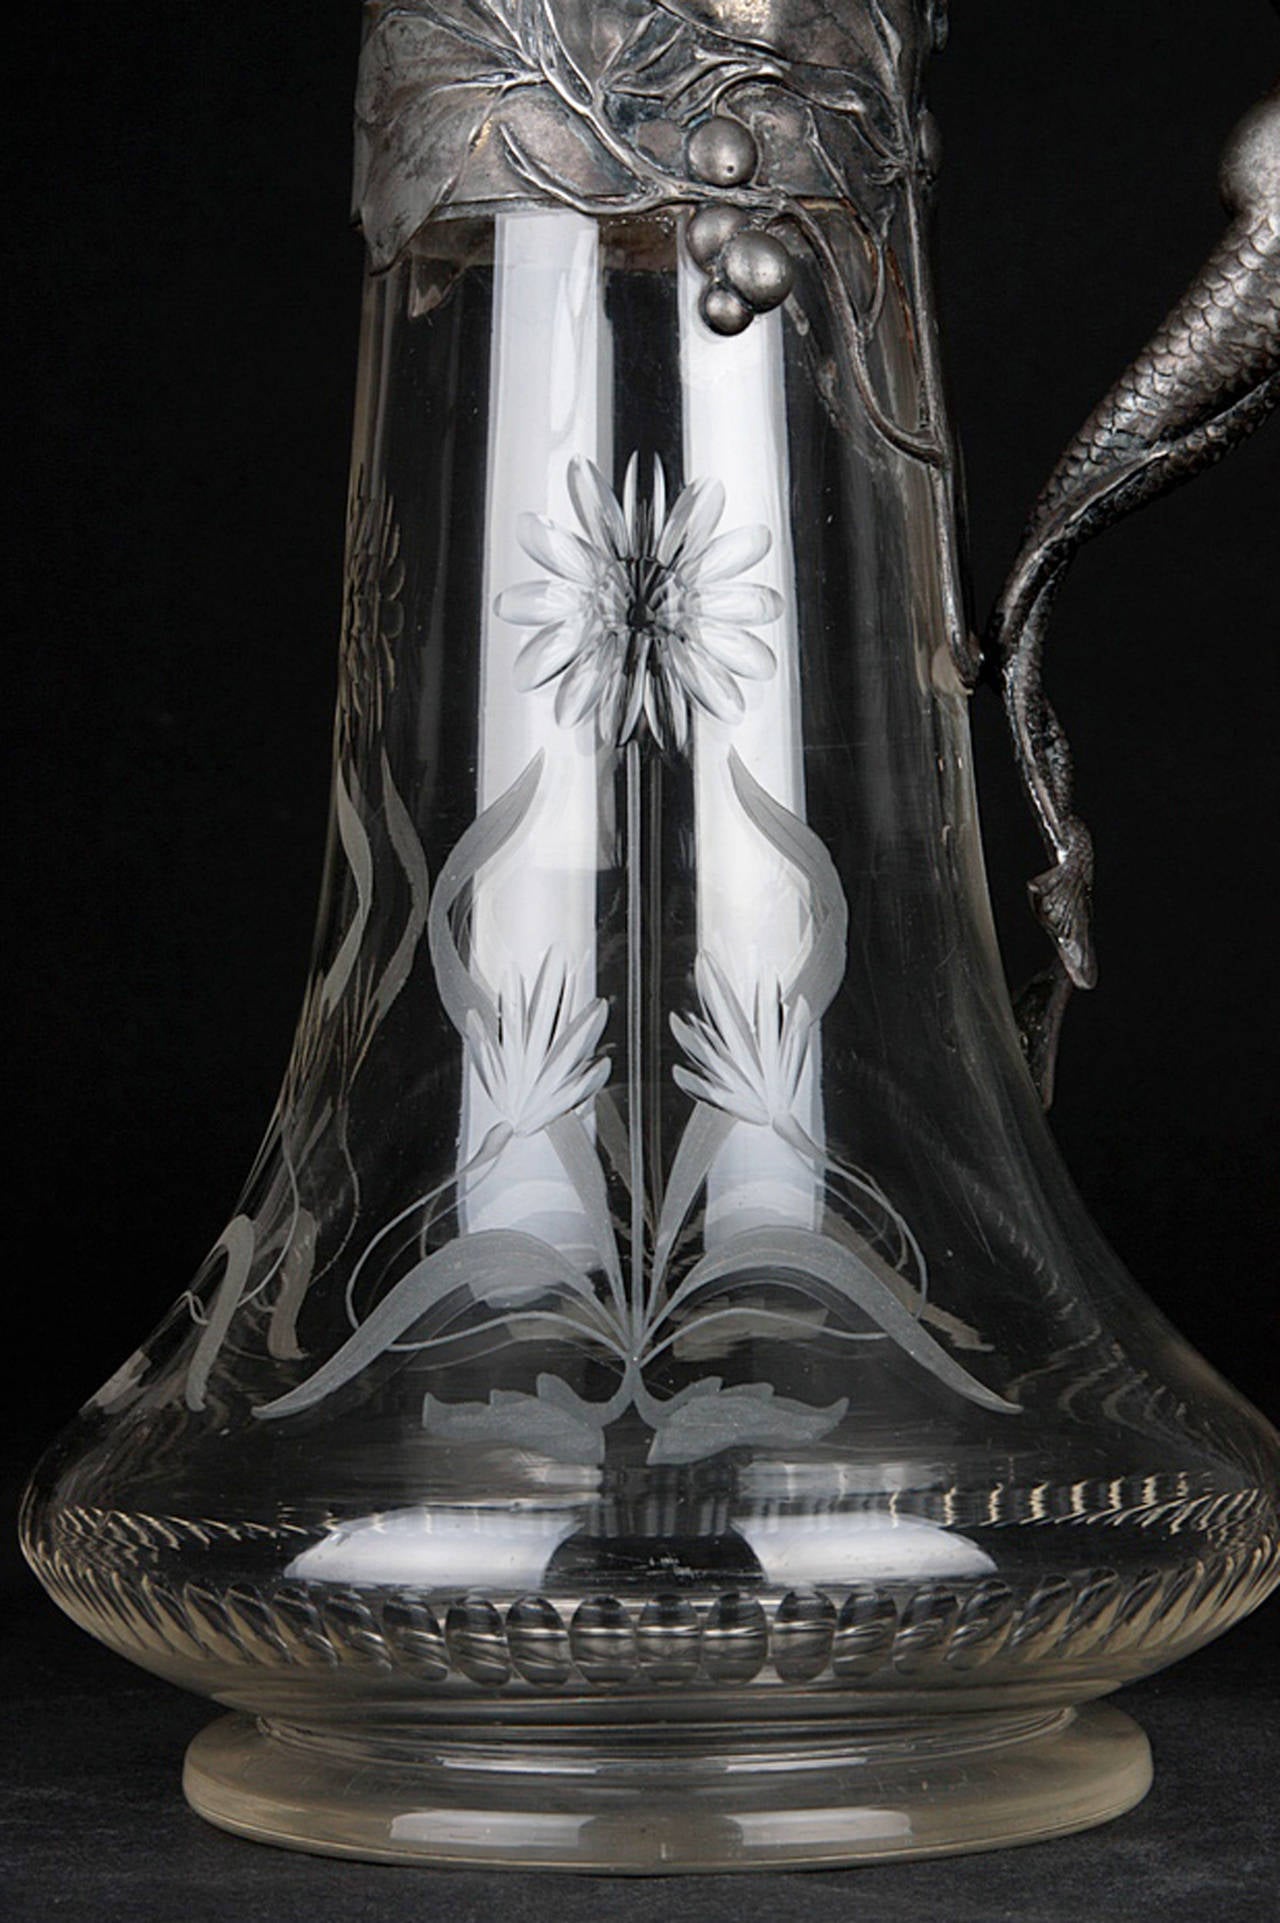 Large Art Nouveau WMF Pitcher.
Germany about 1900 - 1910

Thick glass, polished and engraved.
High: 31cm (12.13in)